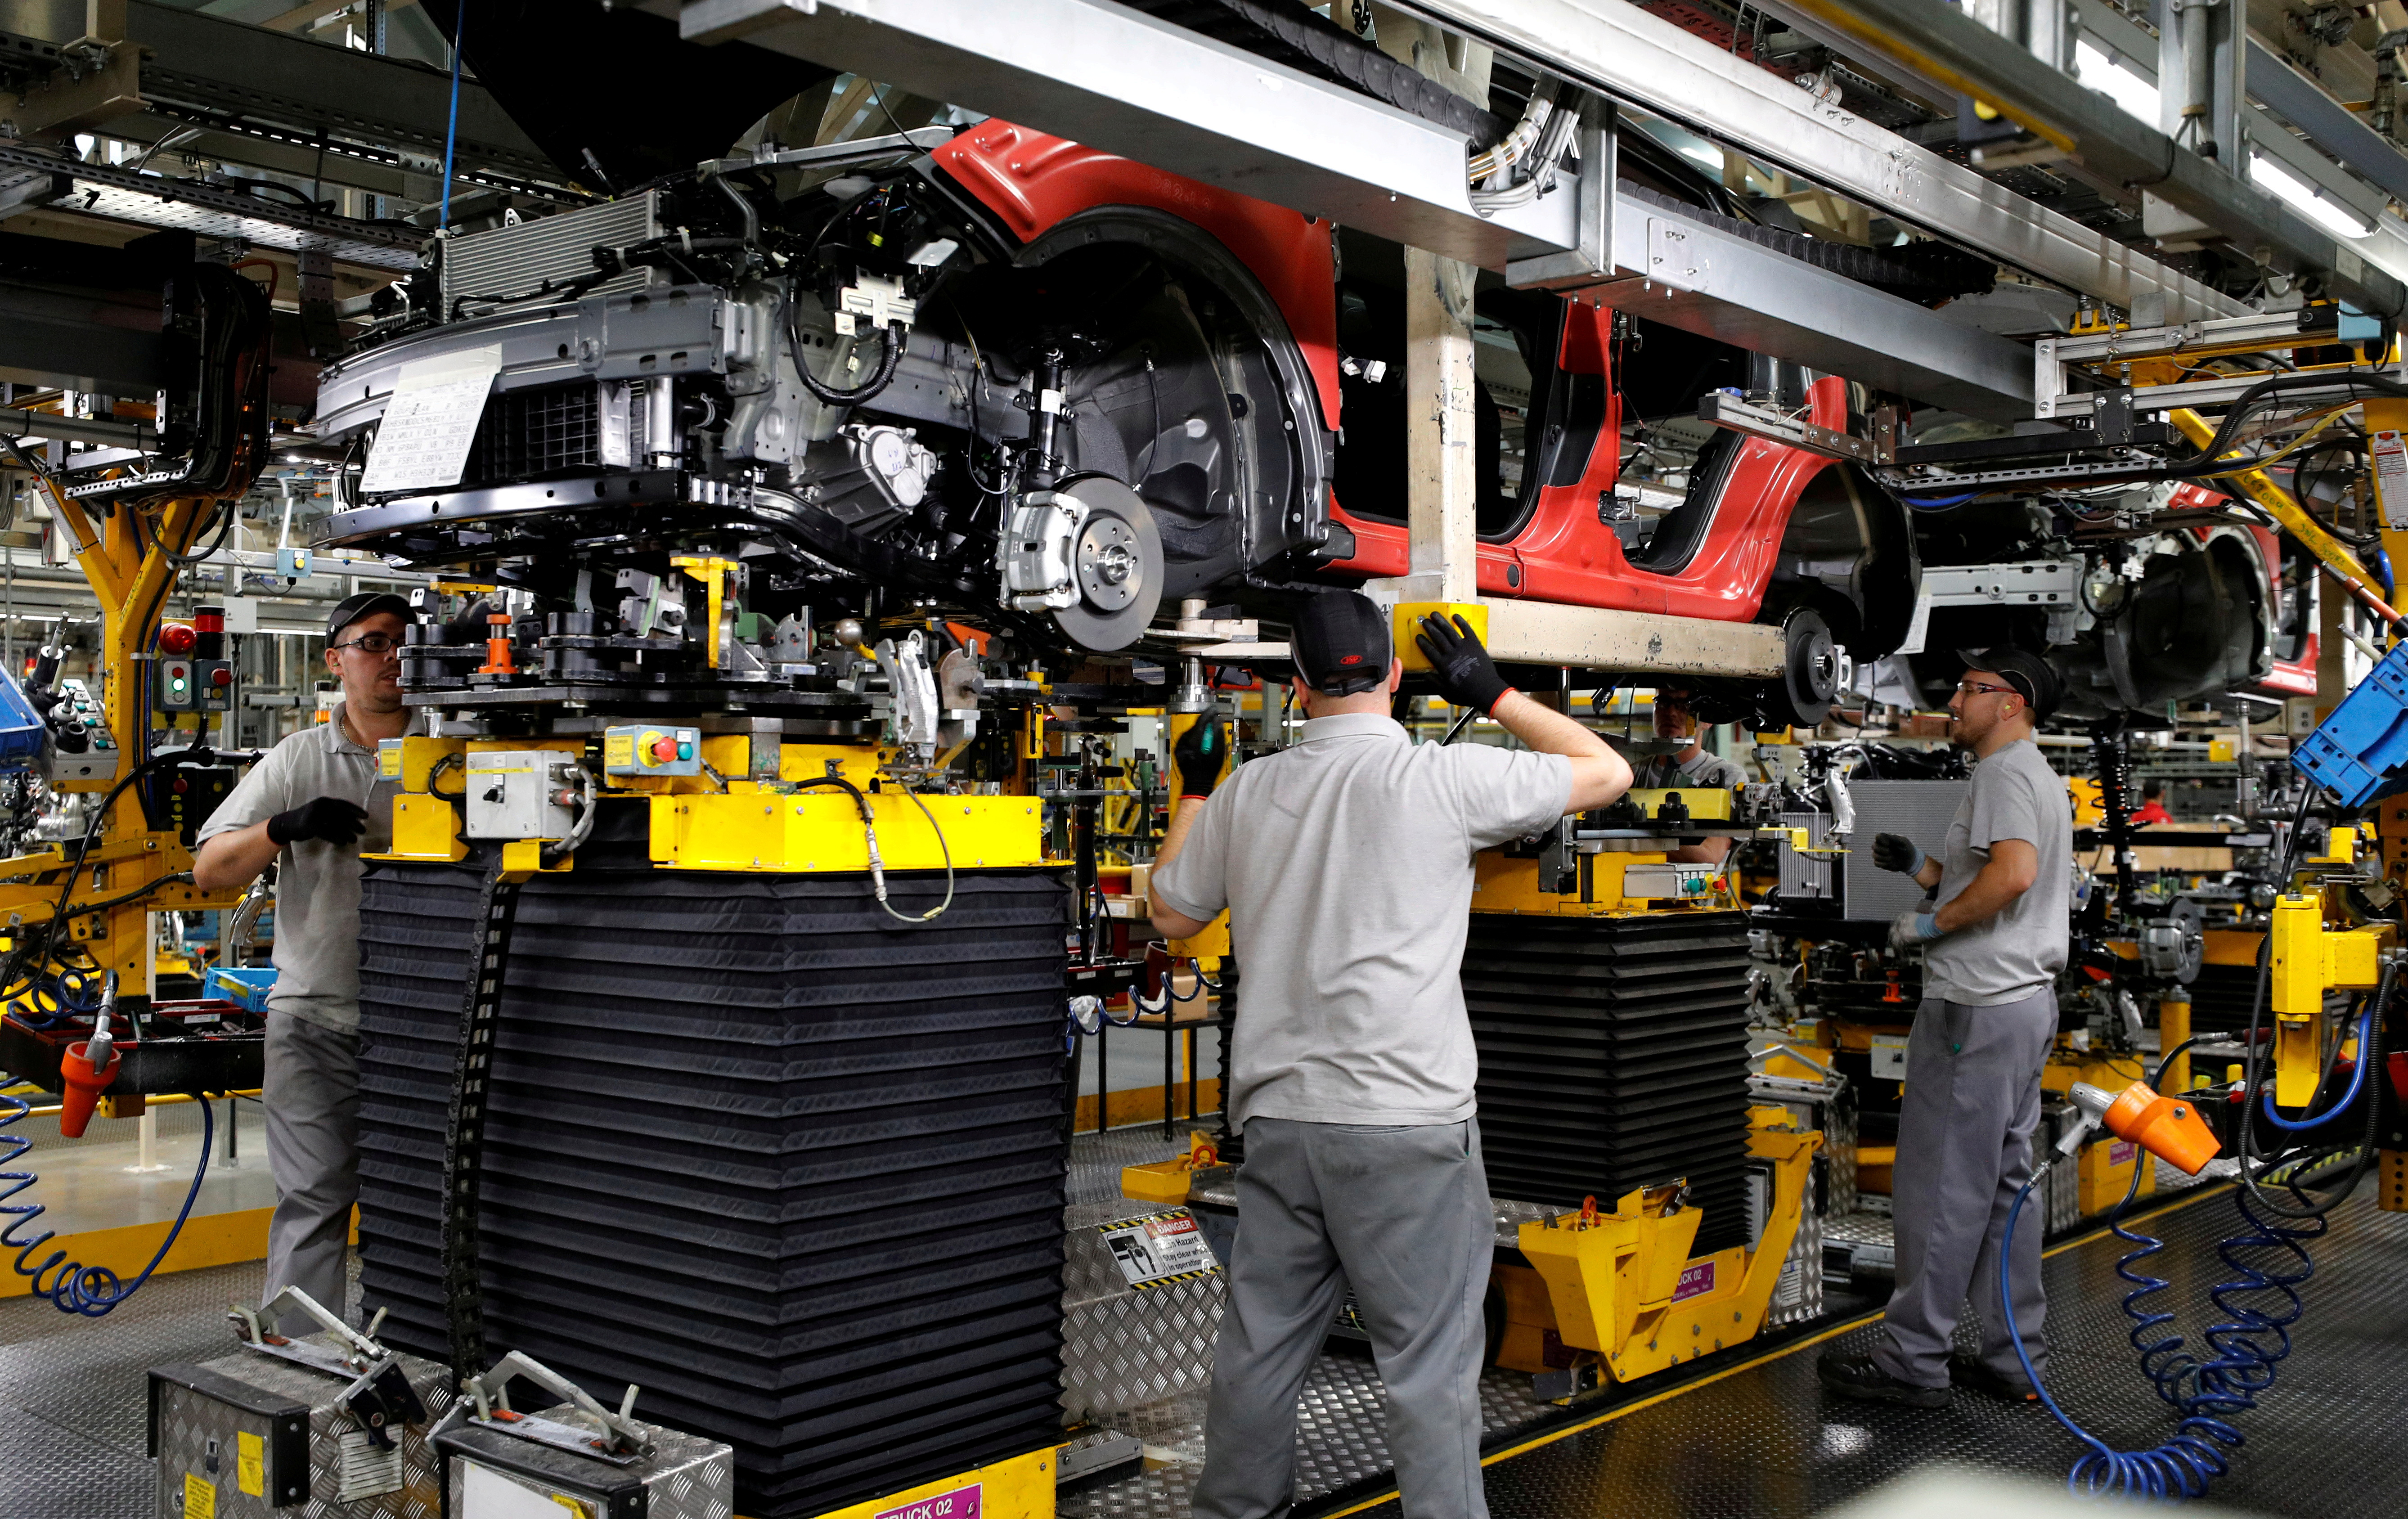 Workers are seen on the production line at Nissan's car plant in Sunderland, Britain